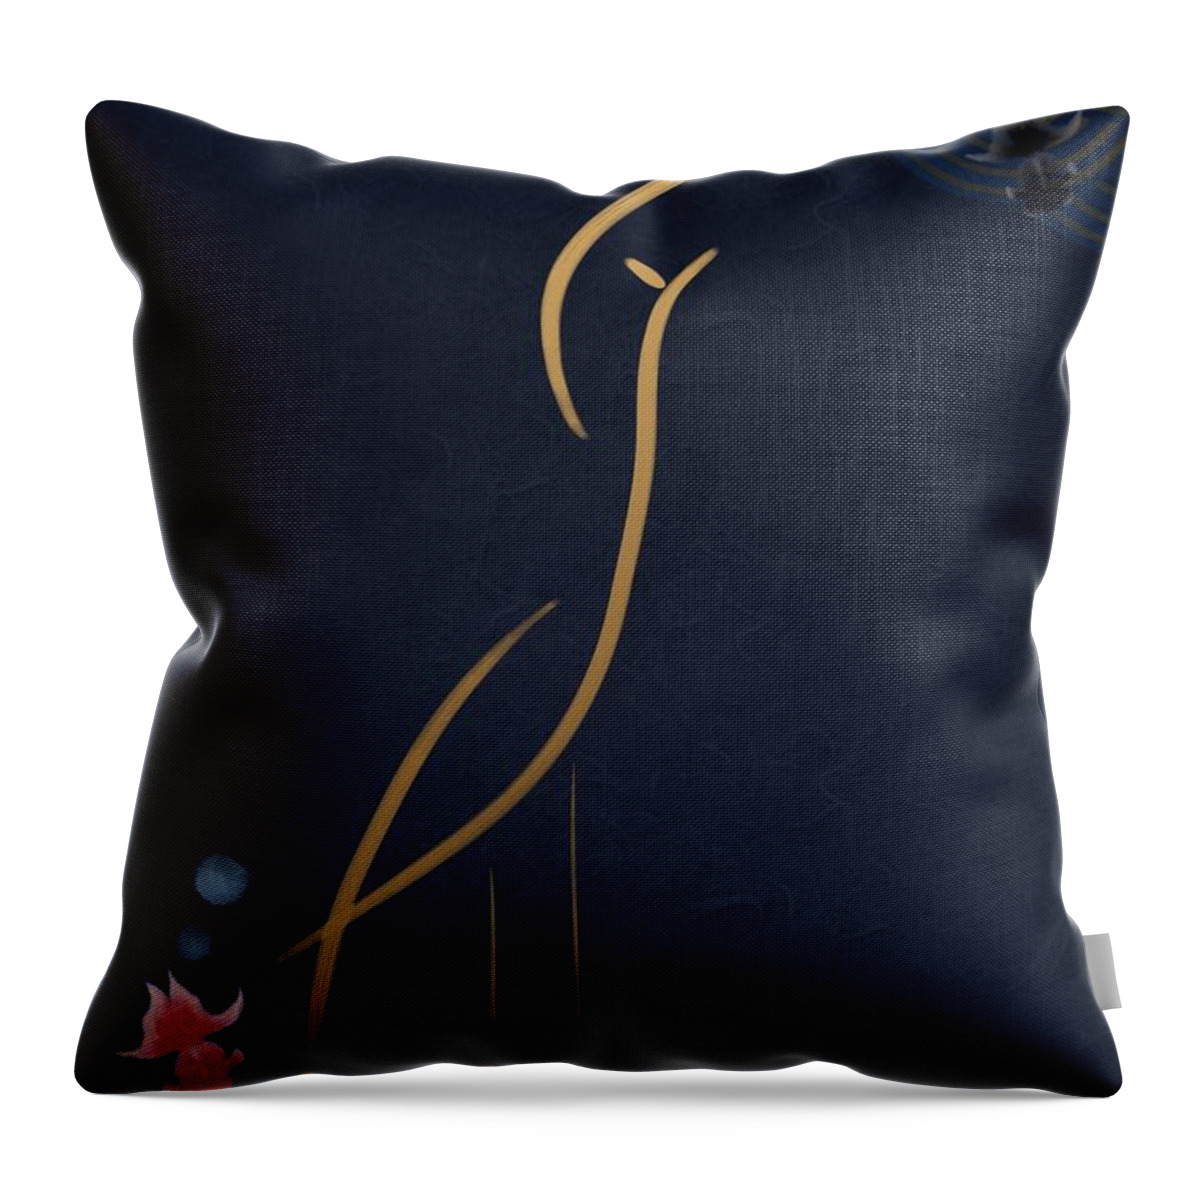 Egret At Night Throw Pillow featuring the digital art Egret At Night by Frank Bright